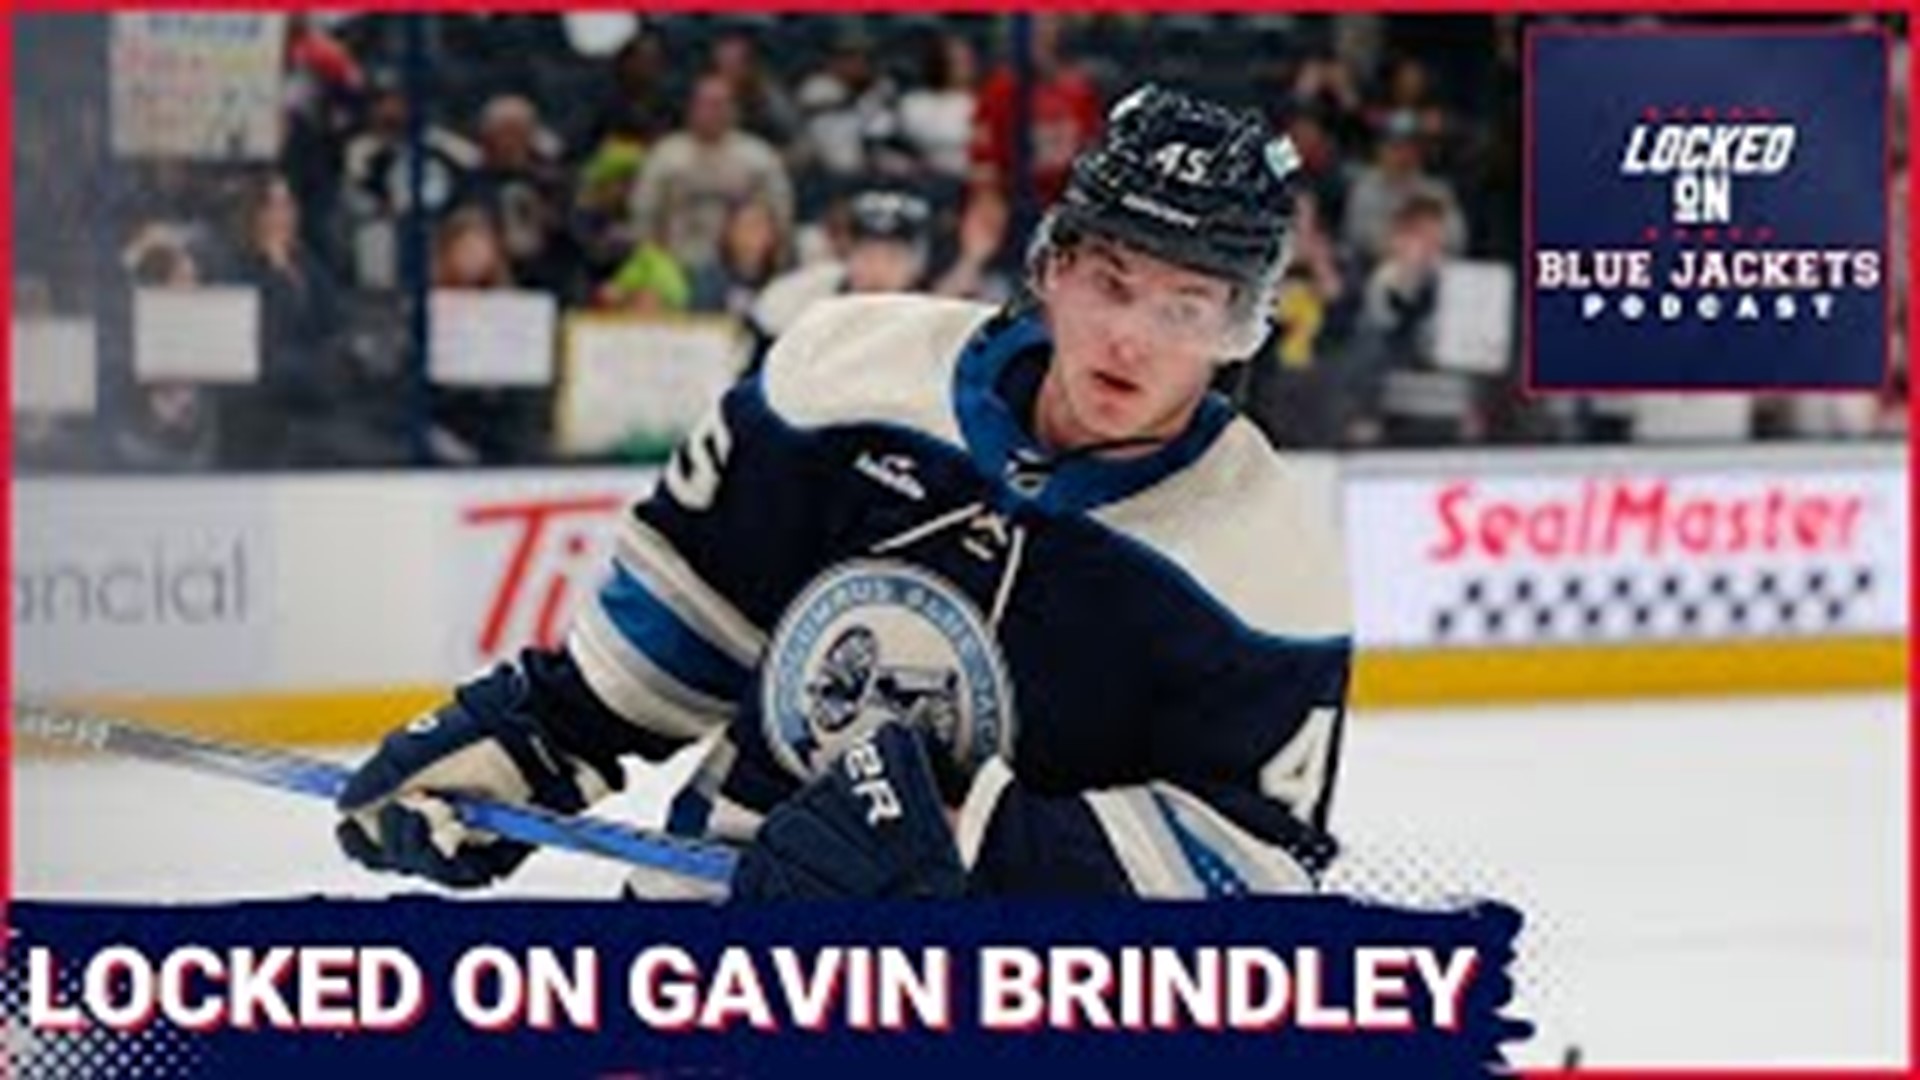 Gavin Brindley didn't have a flashy debut with the Blue Jackets, but it was very quietly solid, showing strong defensive skills, energy and pace.